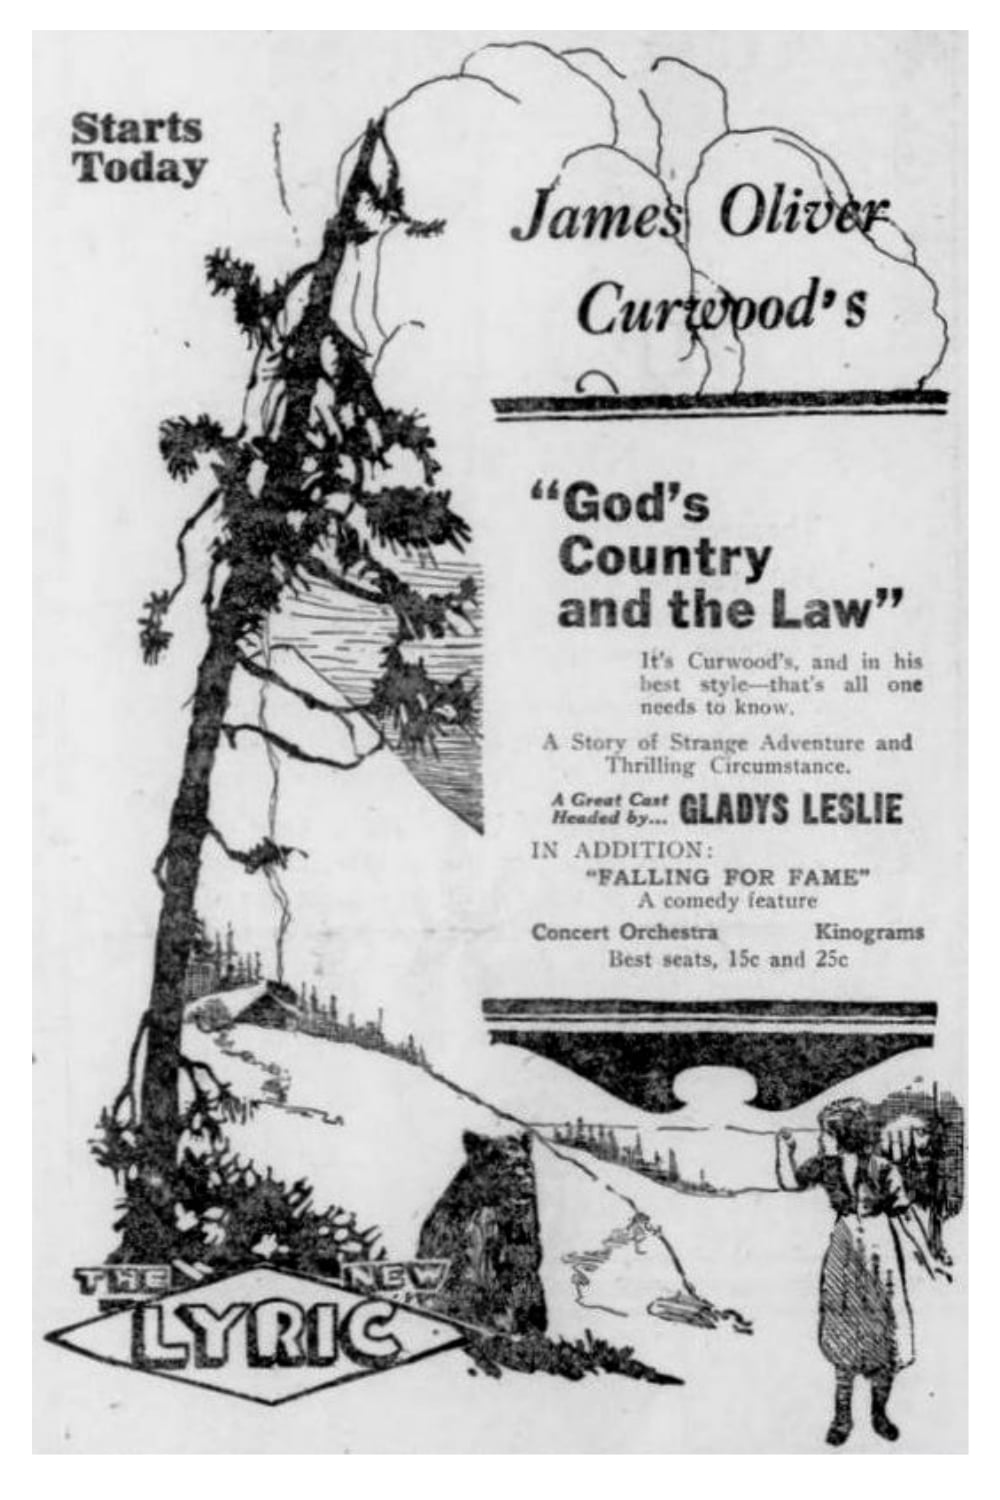 God's Country and the Law